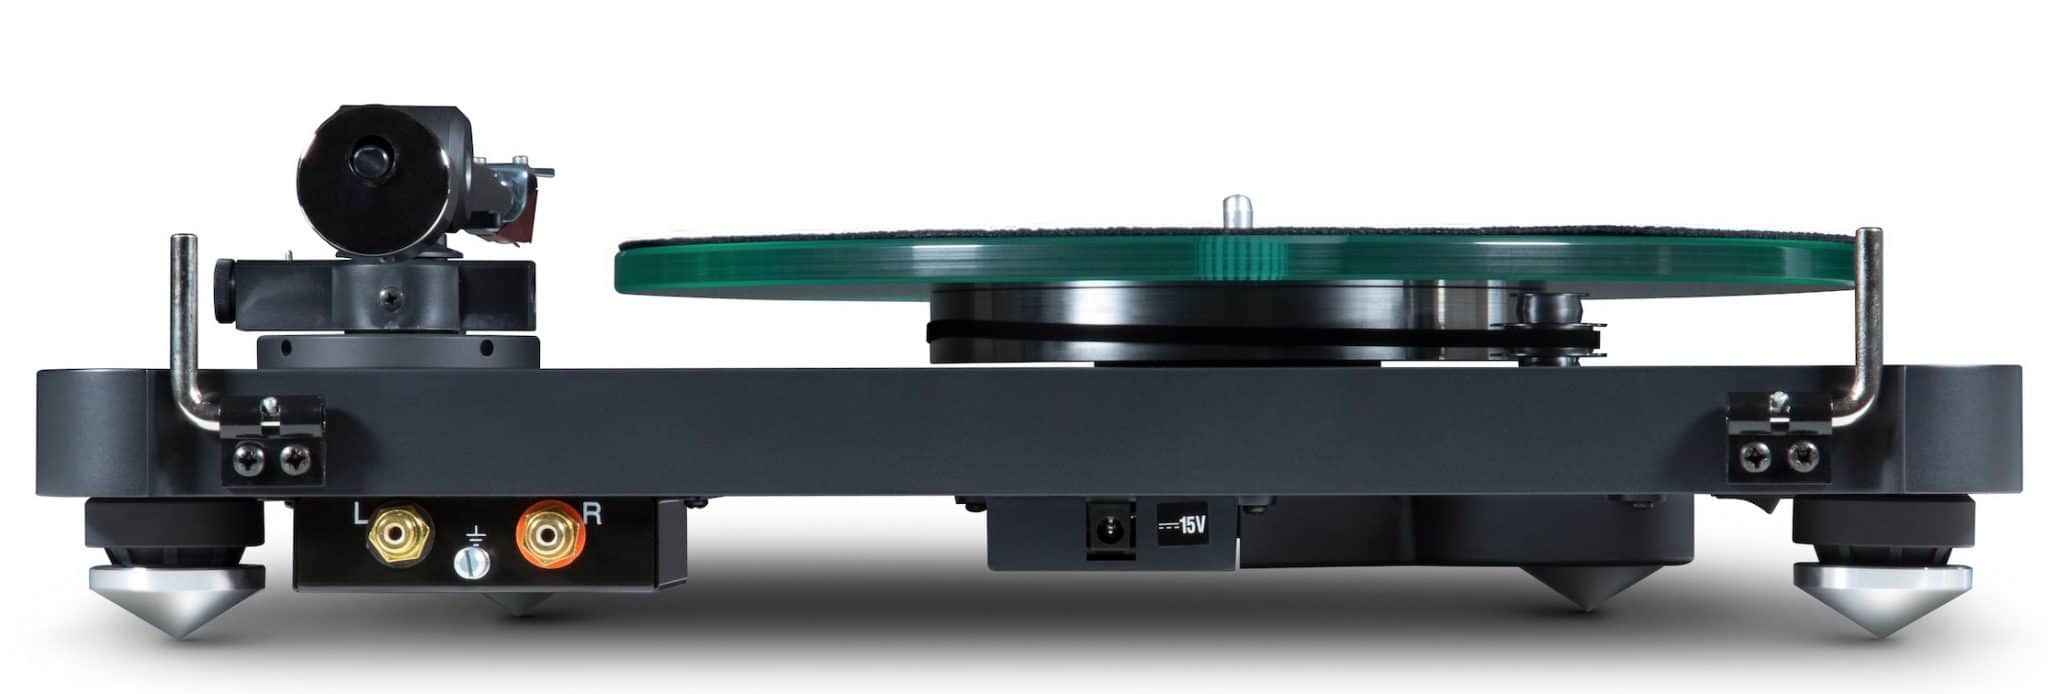 C588 Turntable From NAD